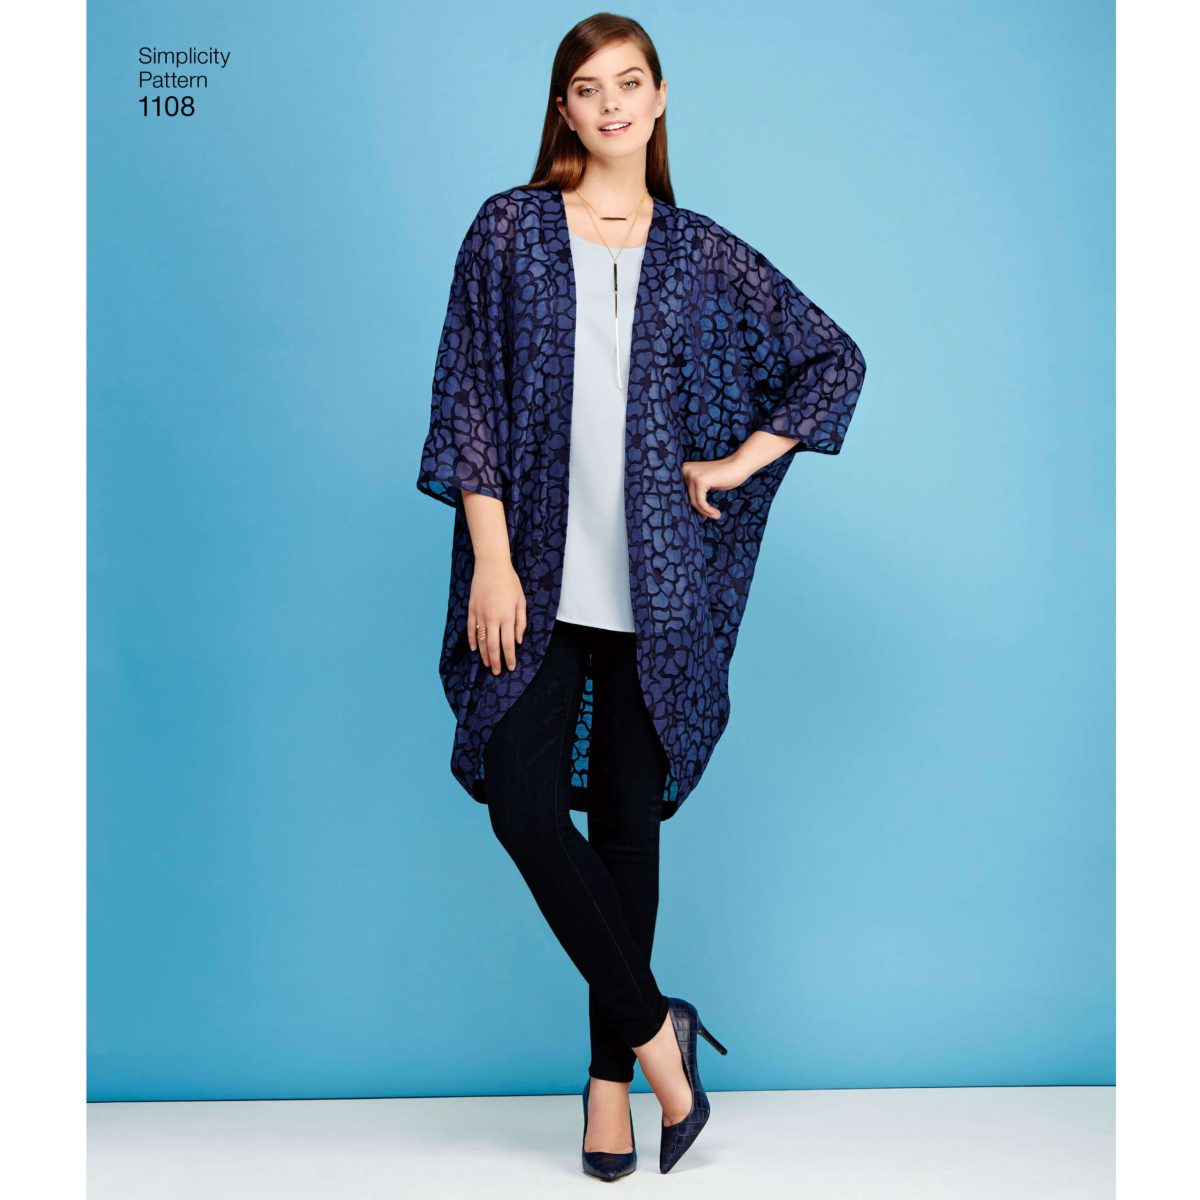 Simplicity Sewing Pattern 1108 Misses' Kimono-Inspired Robe Jackets in Different Styles